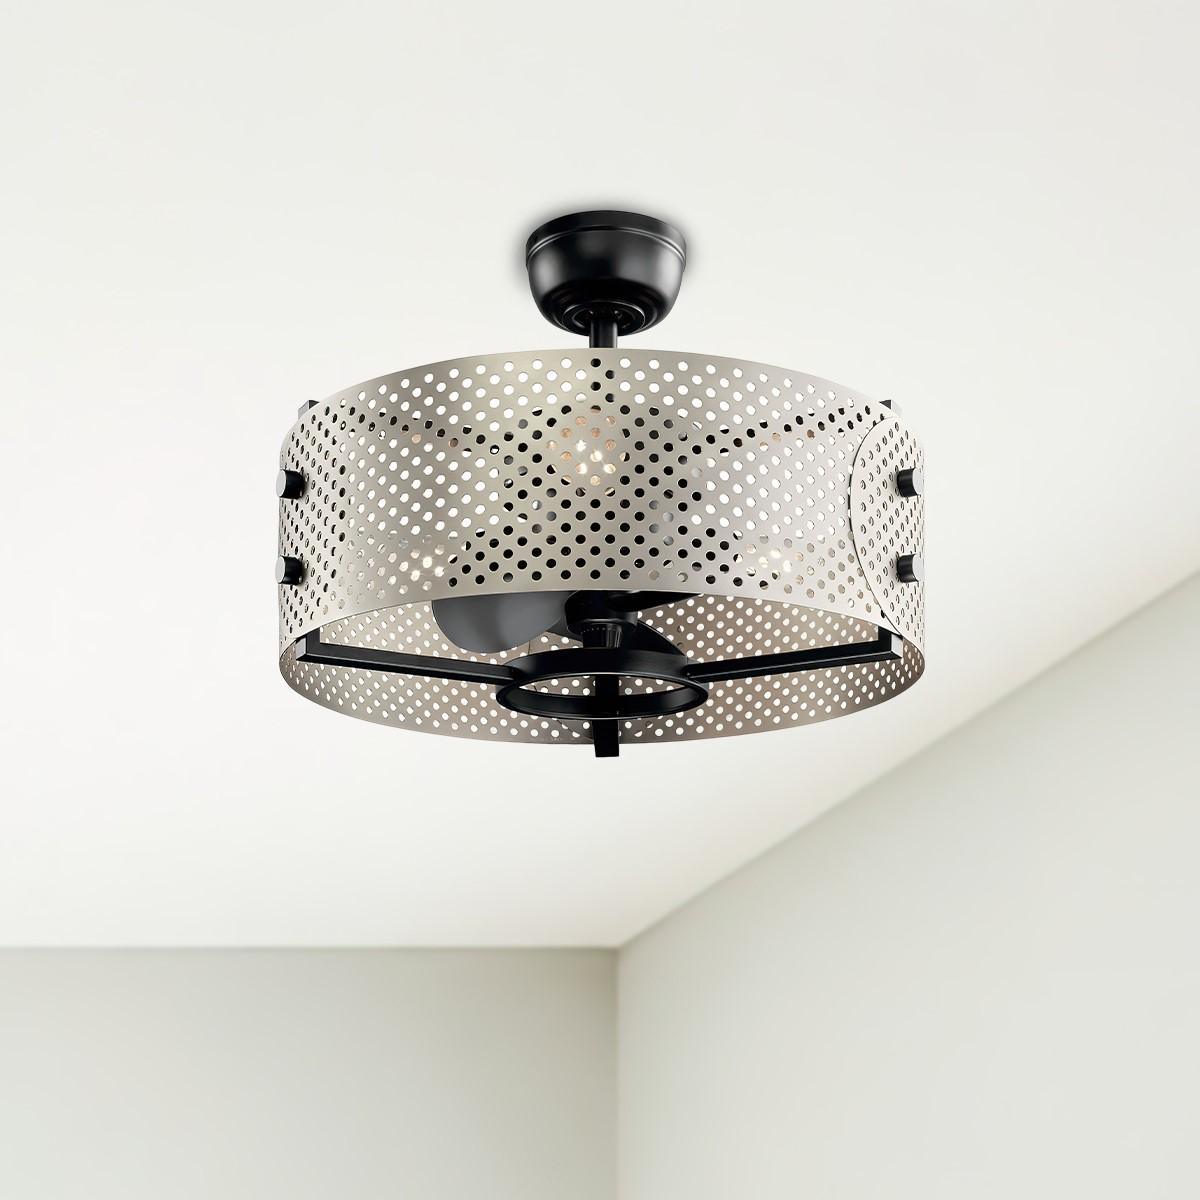 Eyrie 23 Inch Modern Chandelier Ceiling Fan With Light, Wall Control Included - Bees Lighting